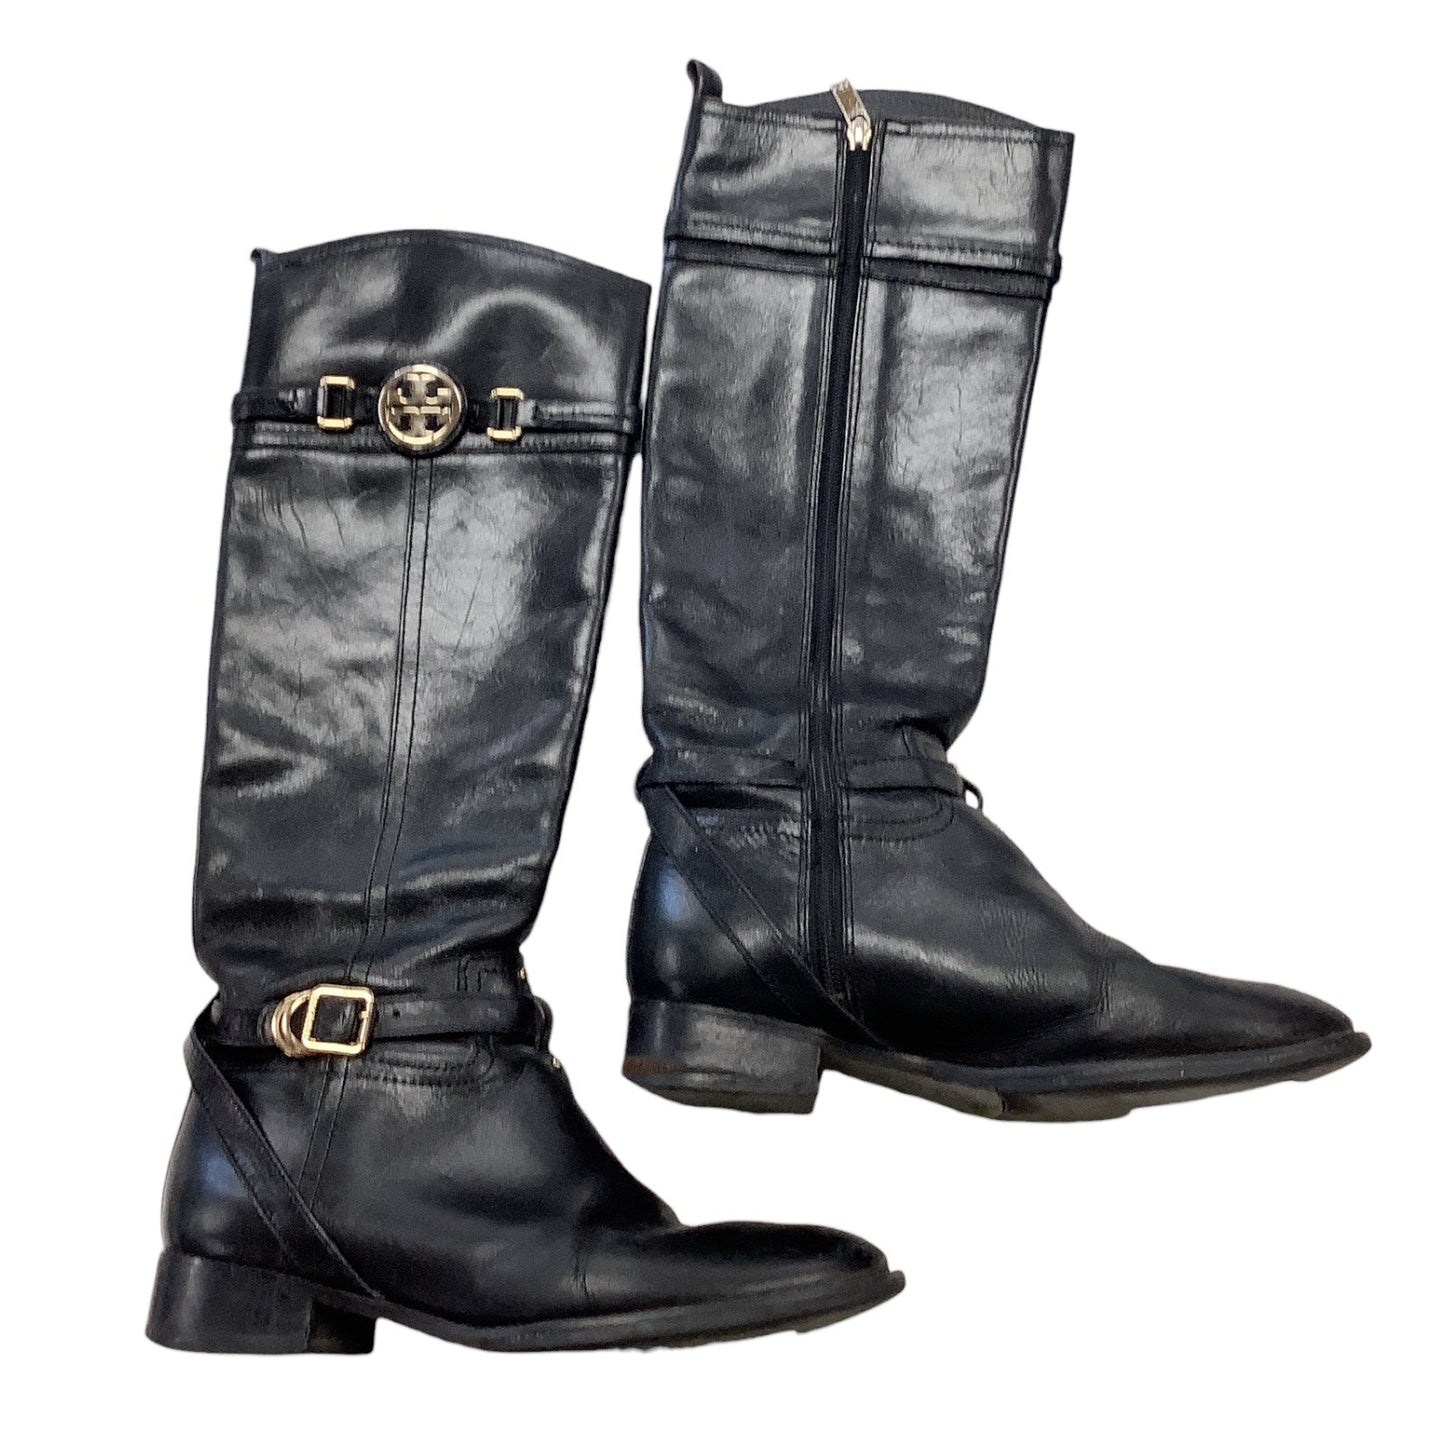 Boots Designer By Tory Burch  Size: 7.5